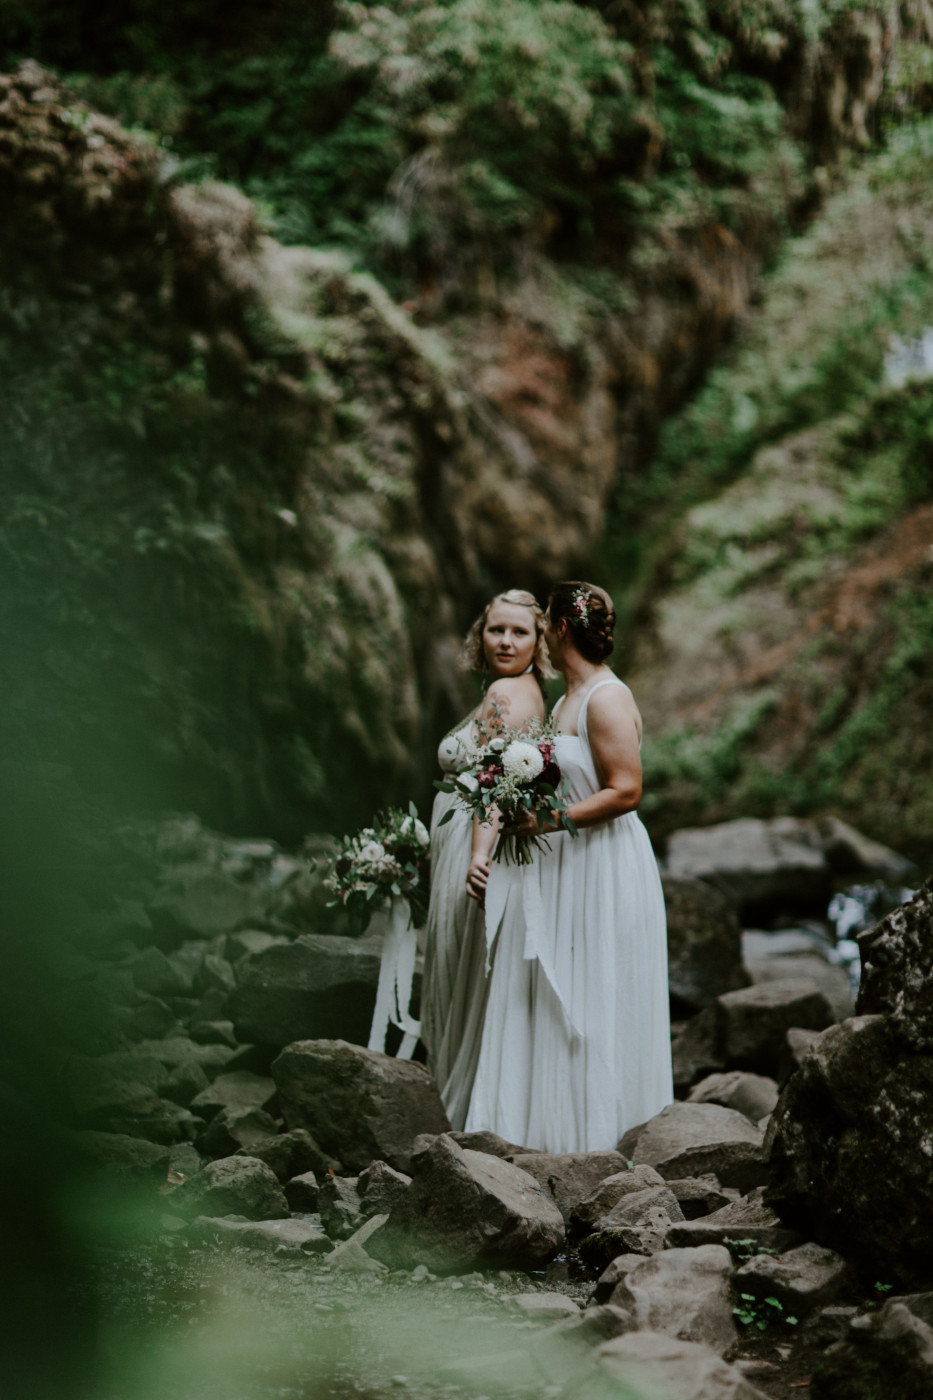 Kate and Audrey stand on the stones along the river. Elopement wedding photography at Bridal Veil Falls by Sienna Plus Josh.